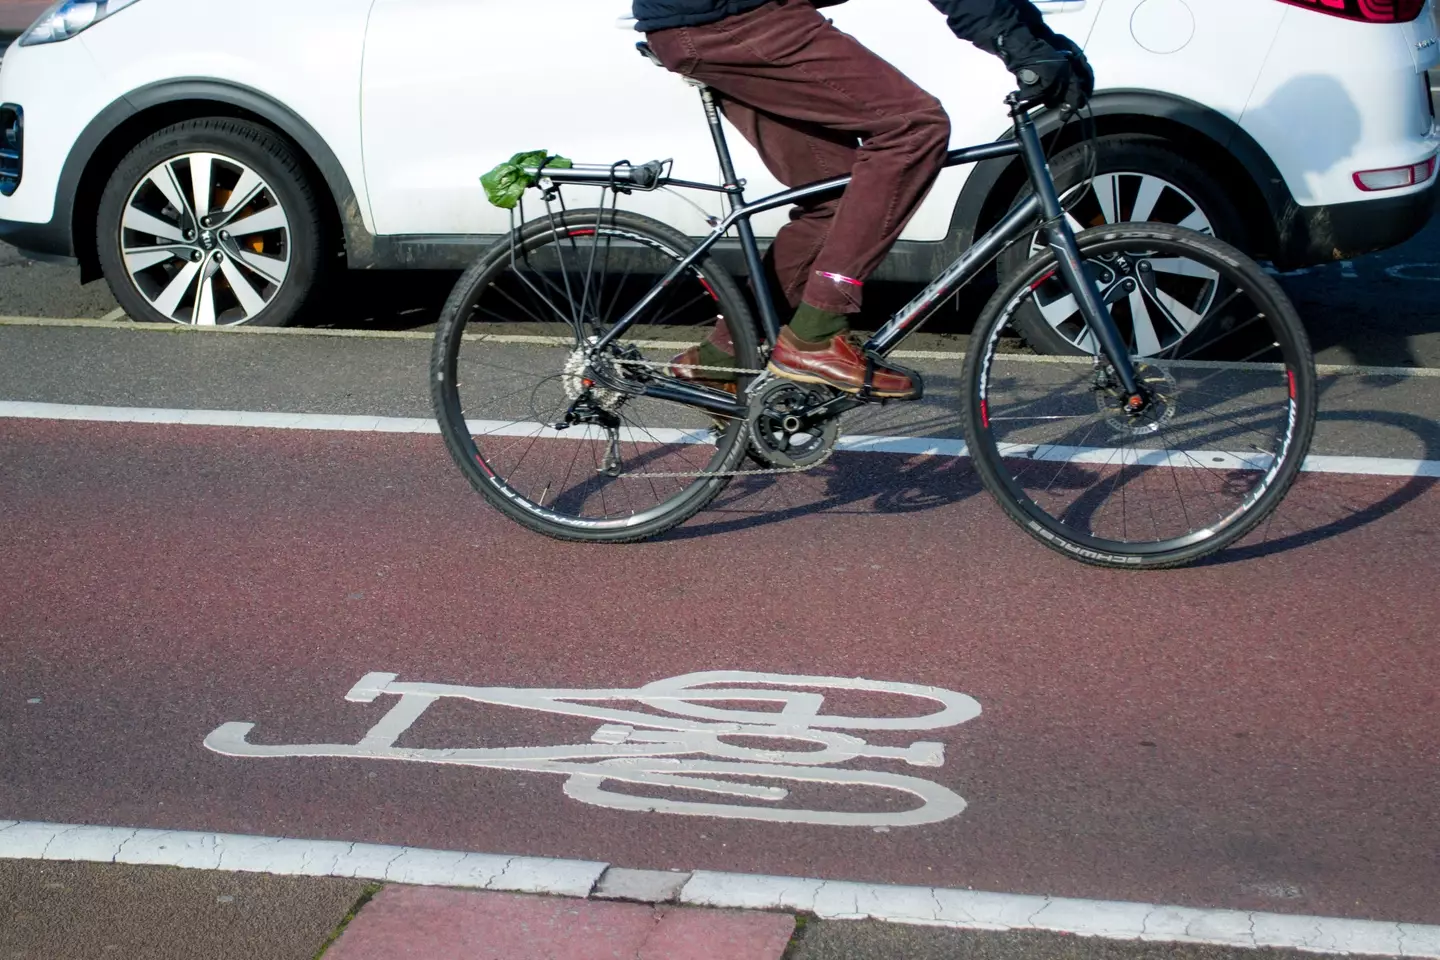 Number plates could soon be introduced on bicycles in the UK, following the moves of North Korea.